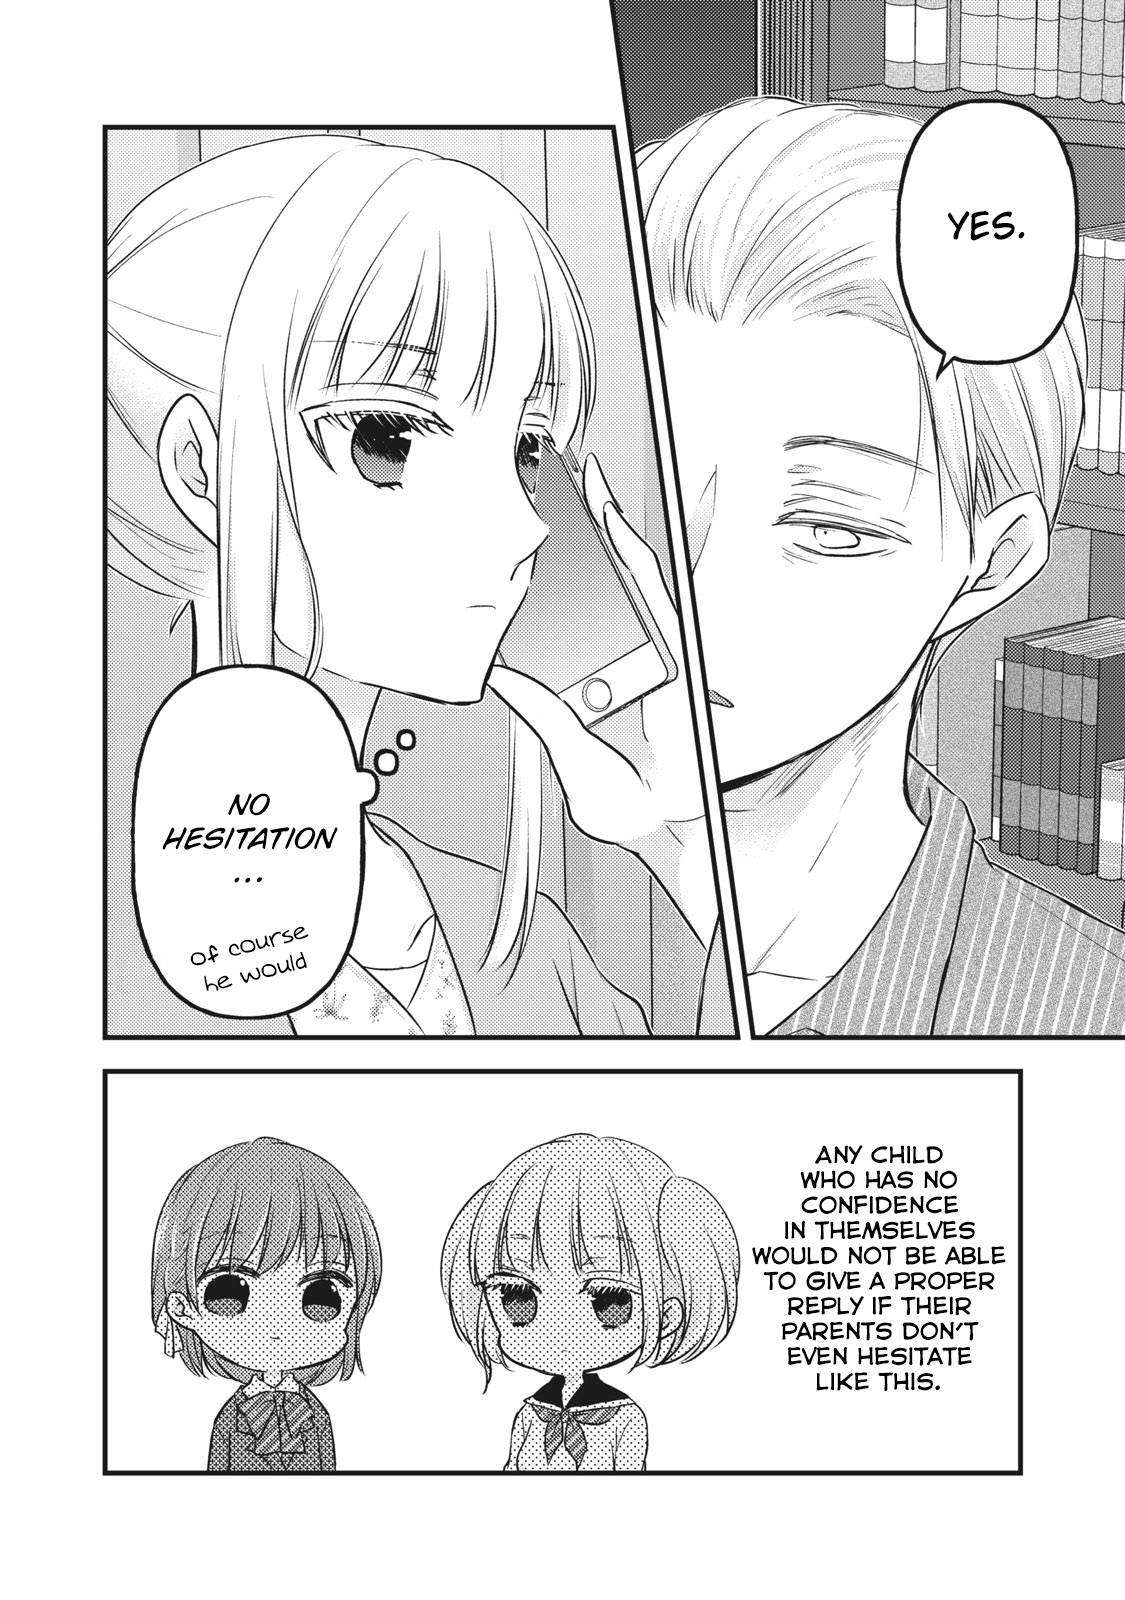 We May Be an Inexperienced Couple but... chapter 81 page 9